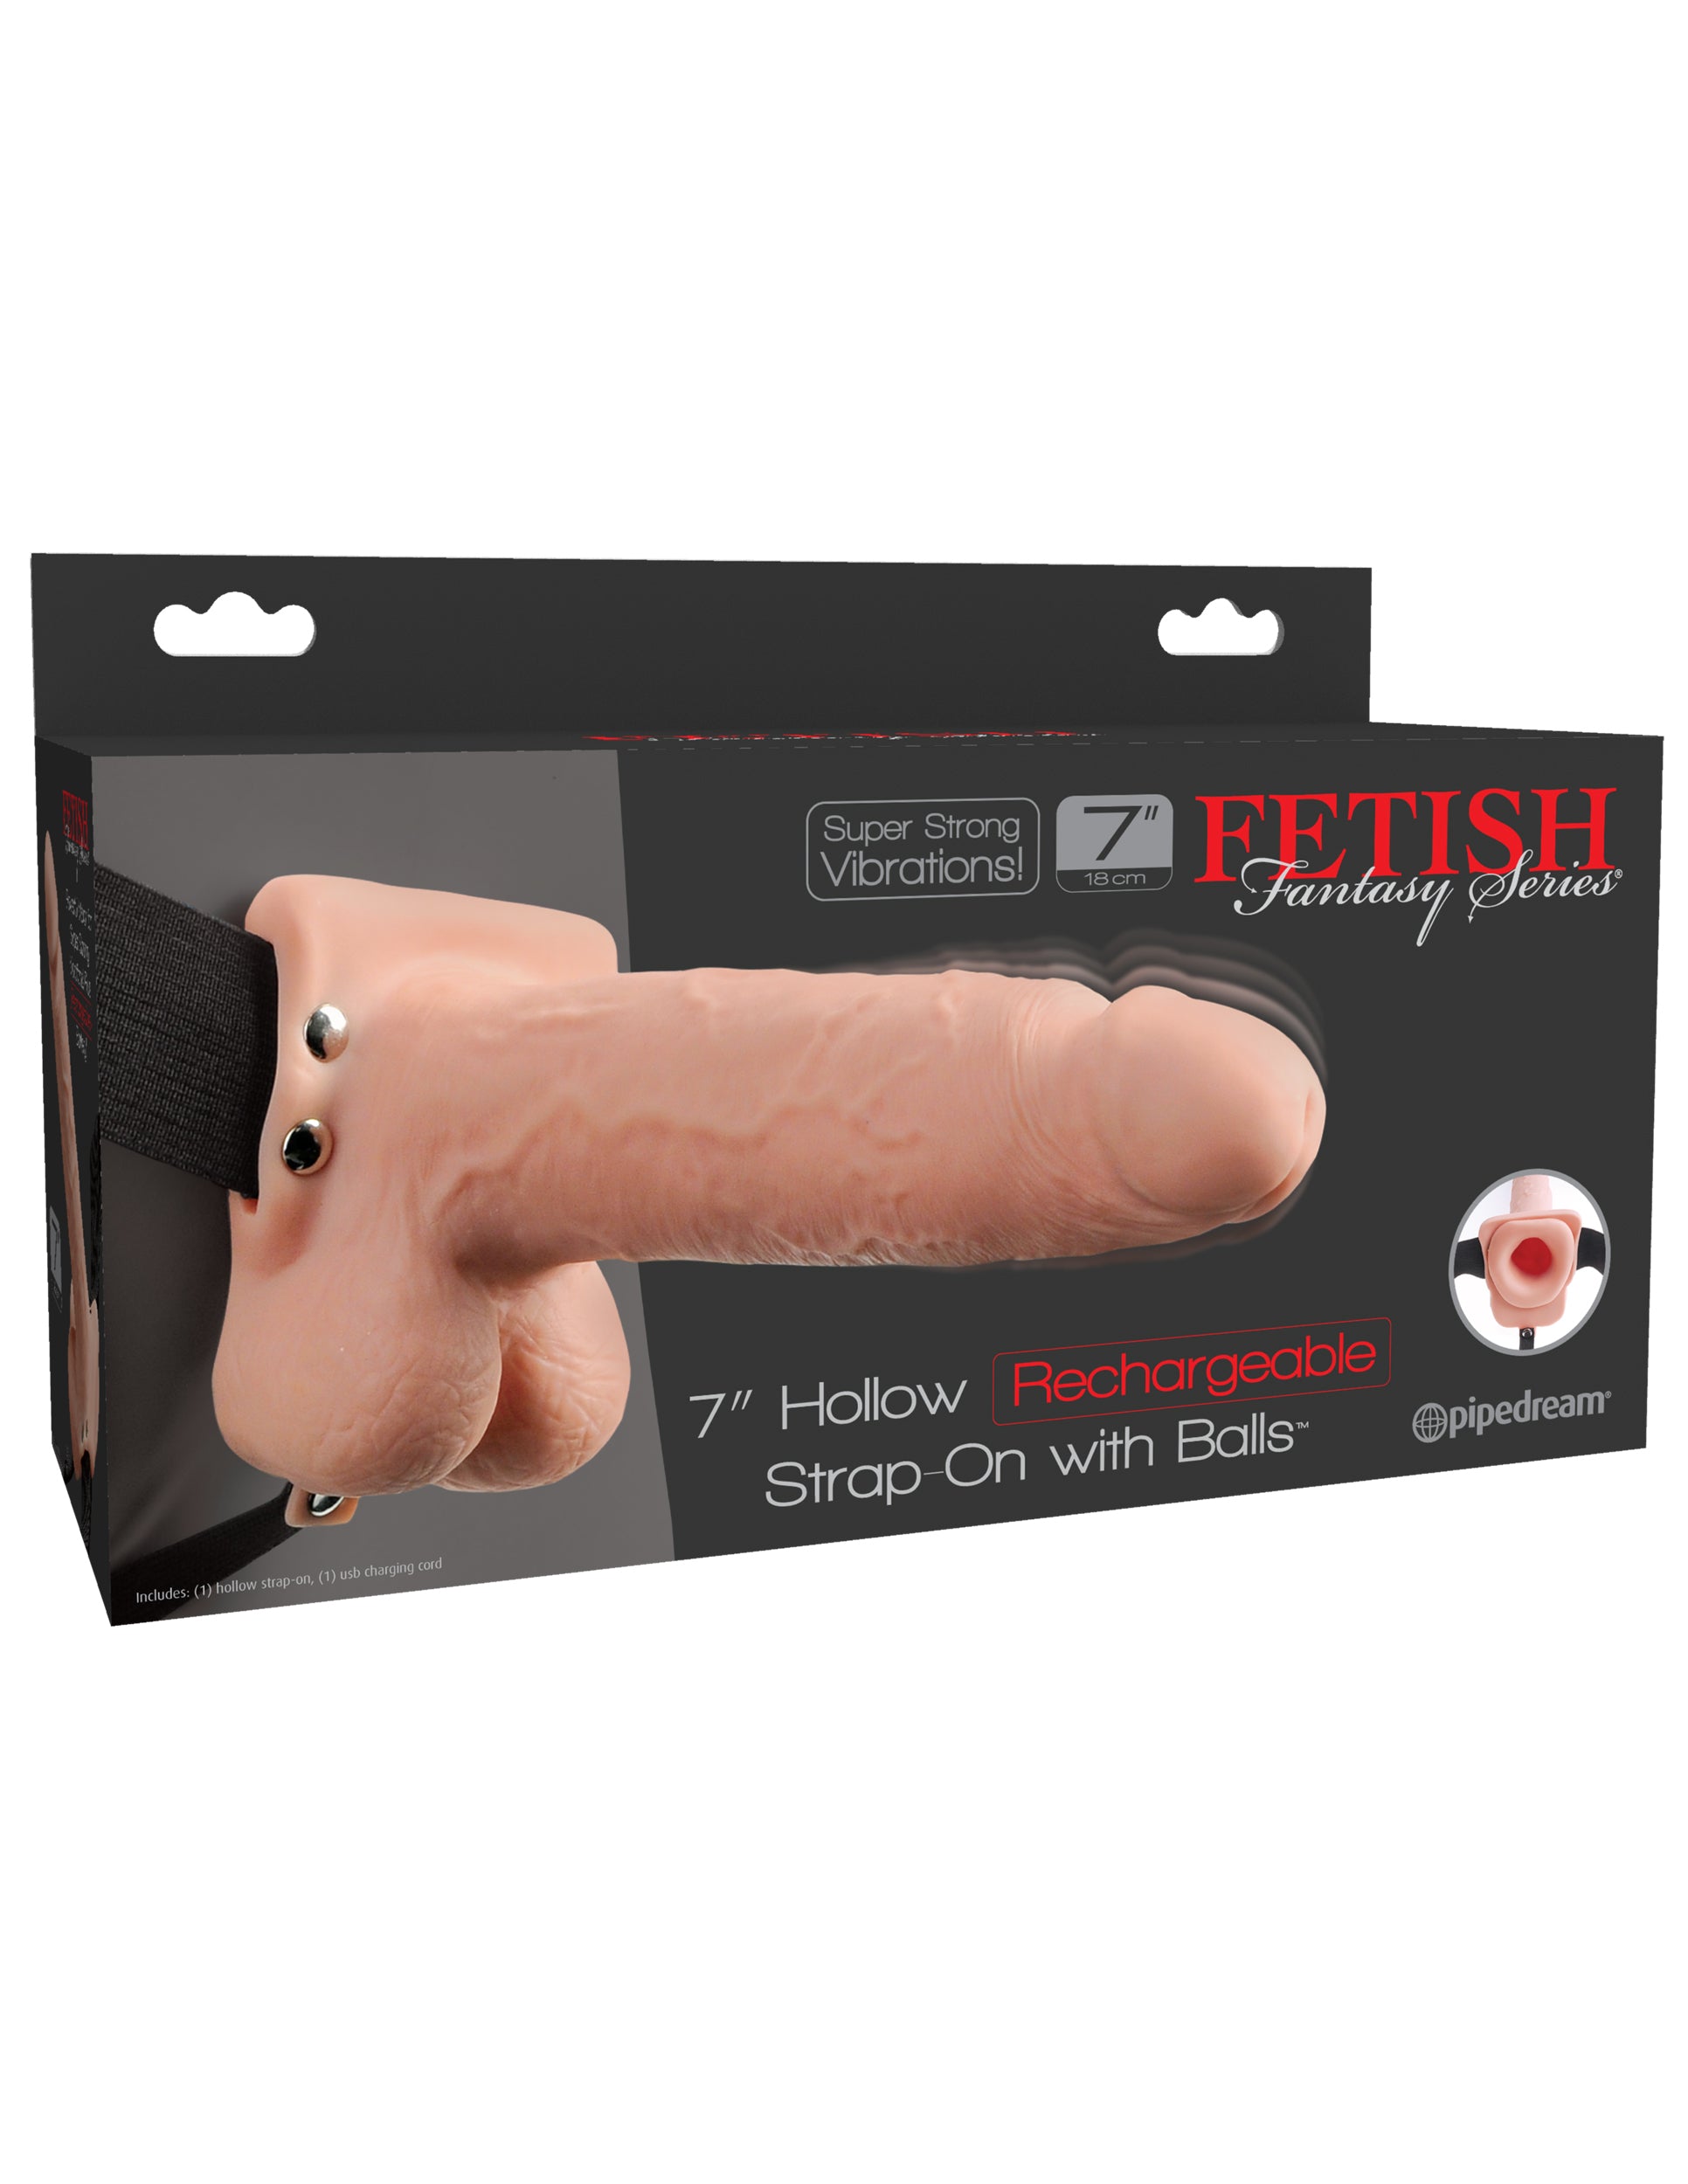 Fetish Fantasy Series 7" Hollow Rechargeable Strap-on With Balls - Flesh PD3391-21